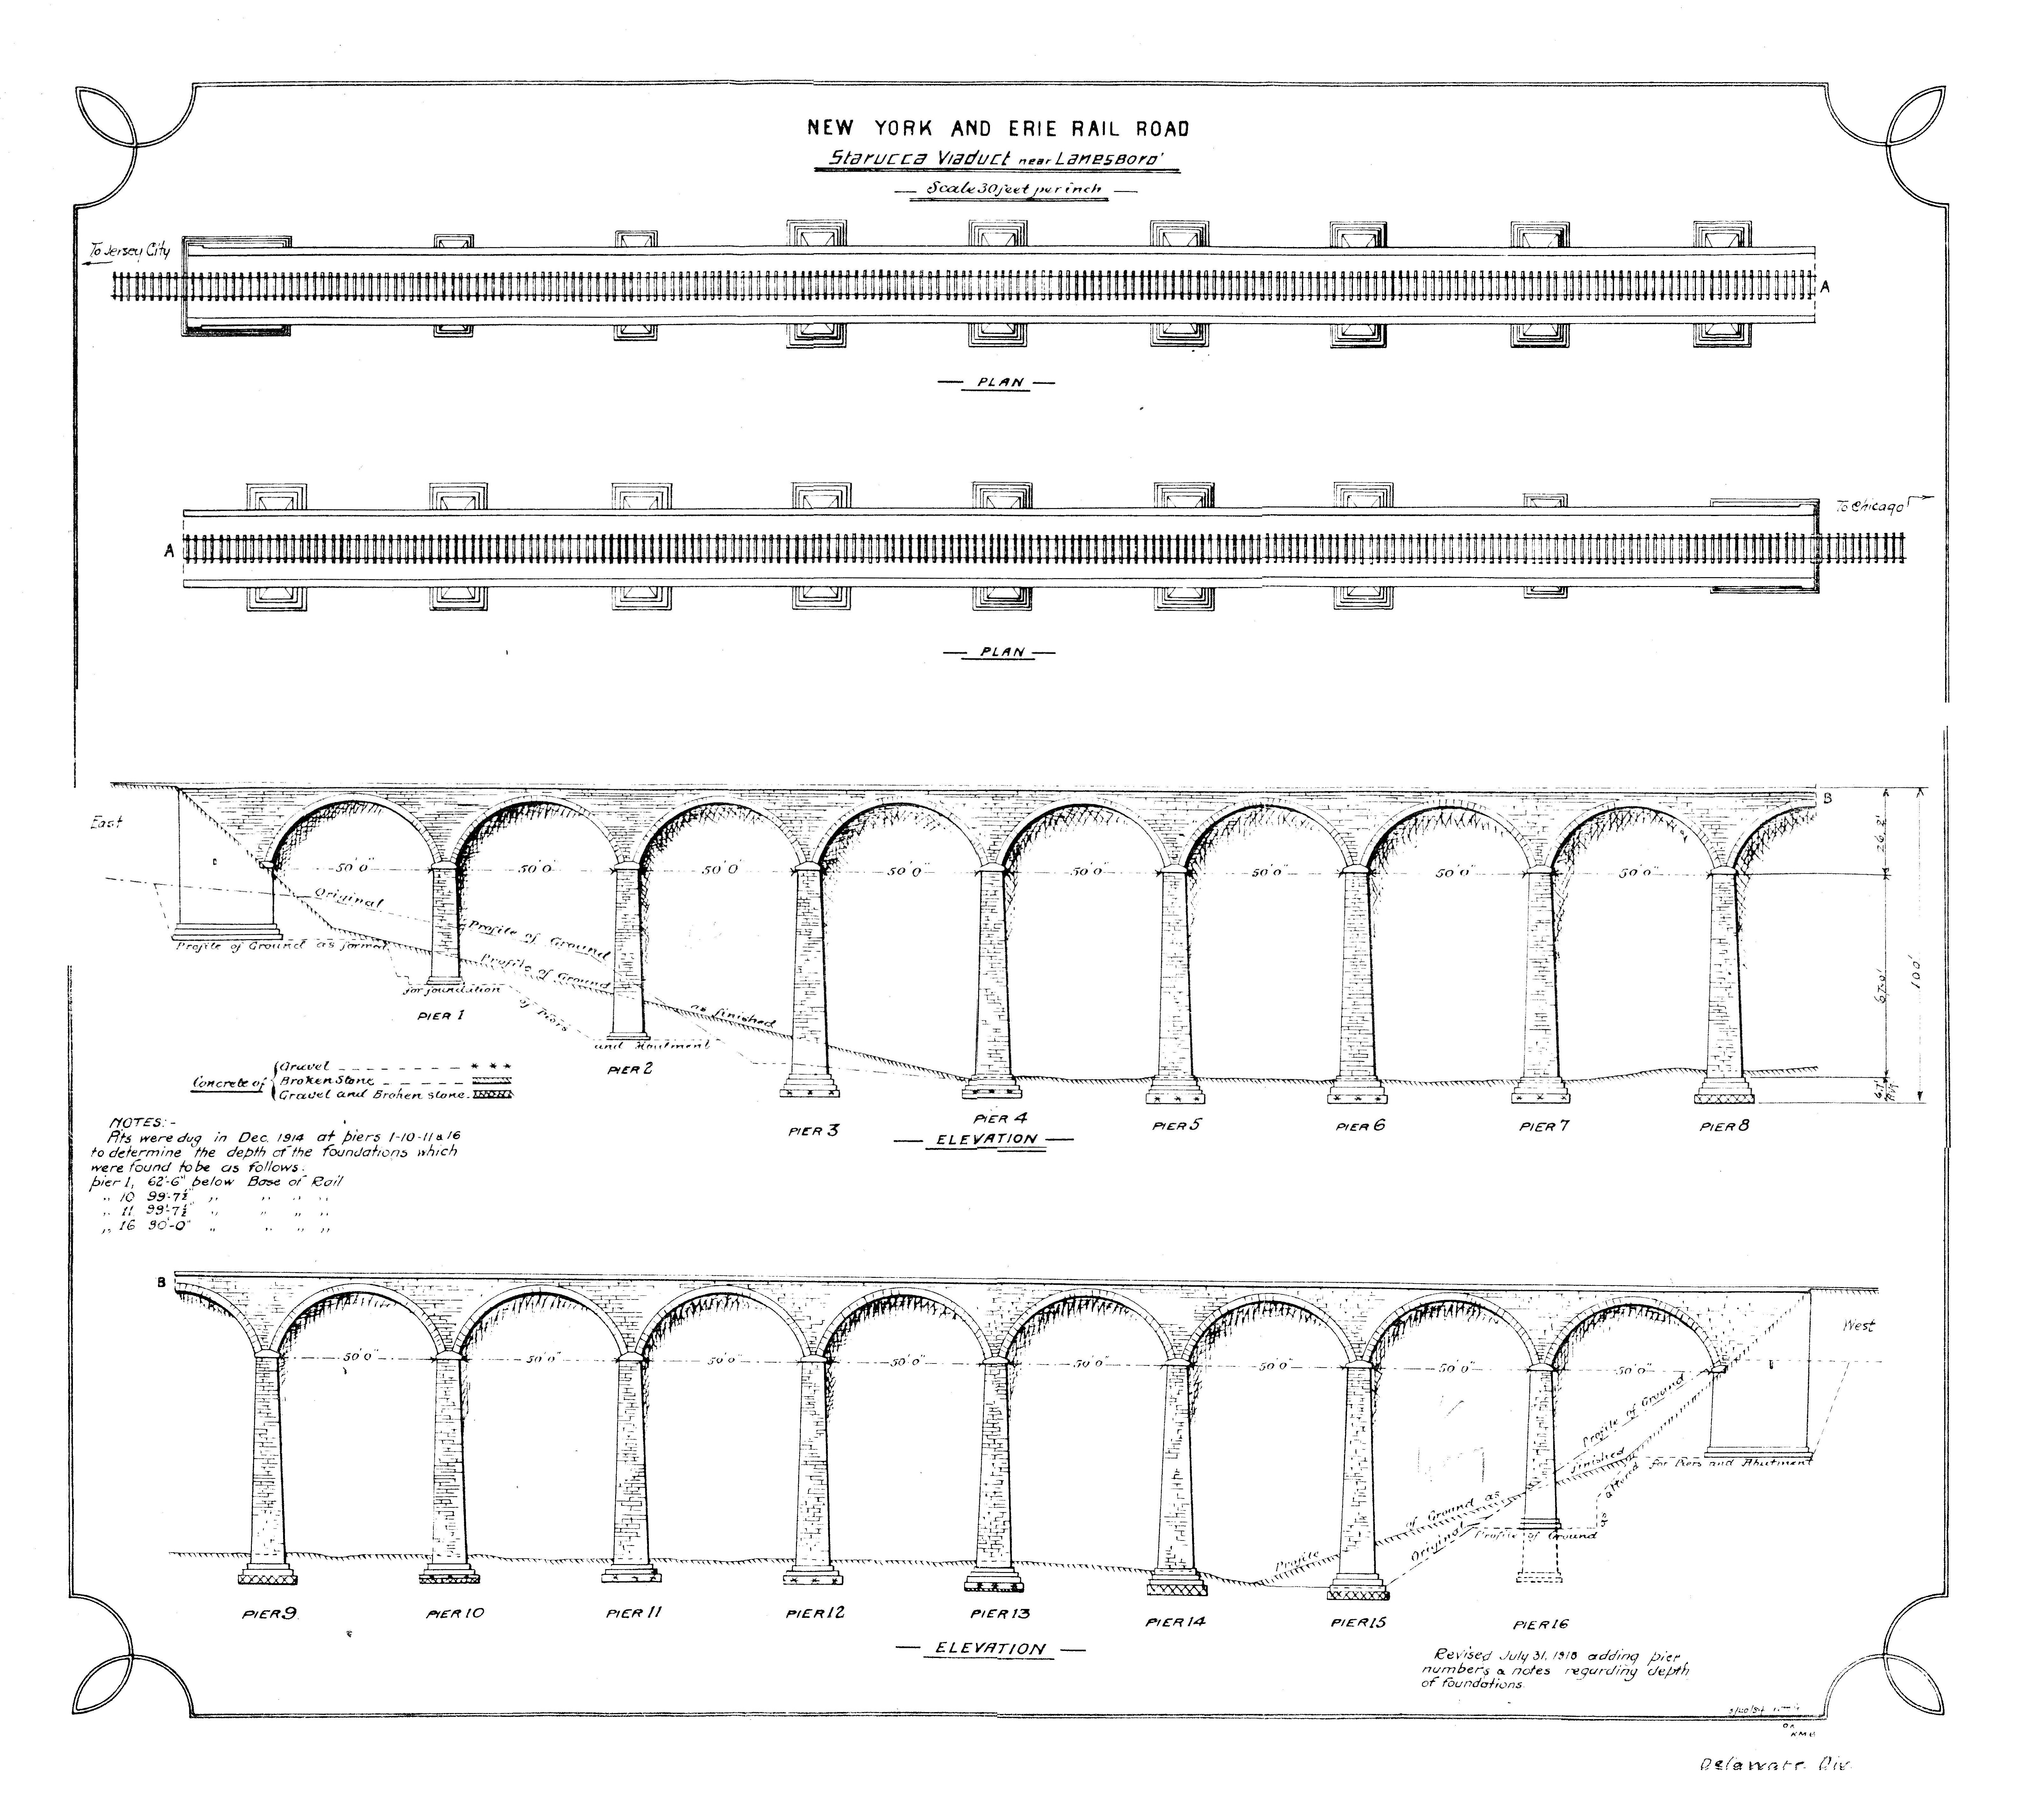 Railroad plans for the Starrucca Viaduct